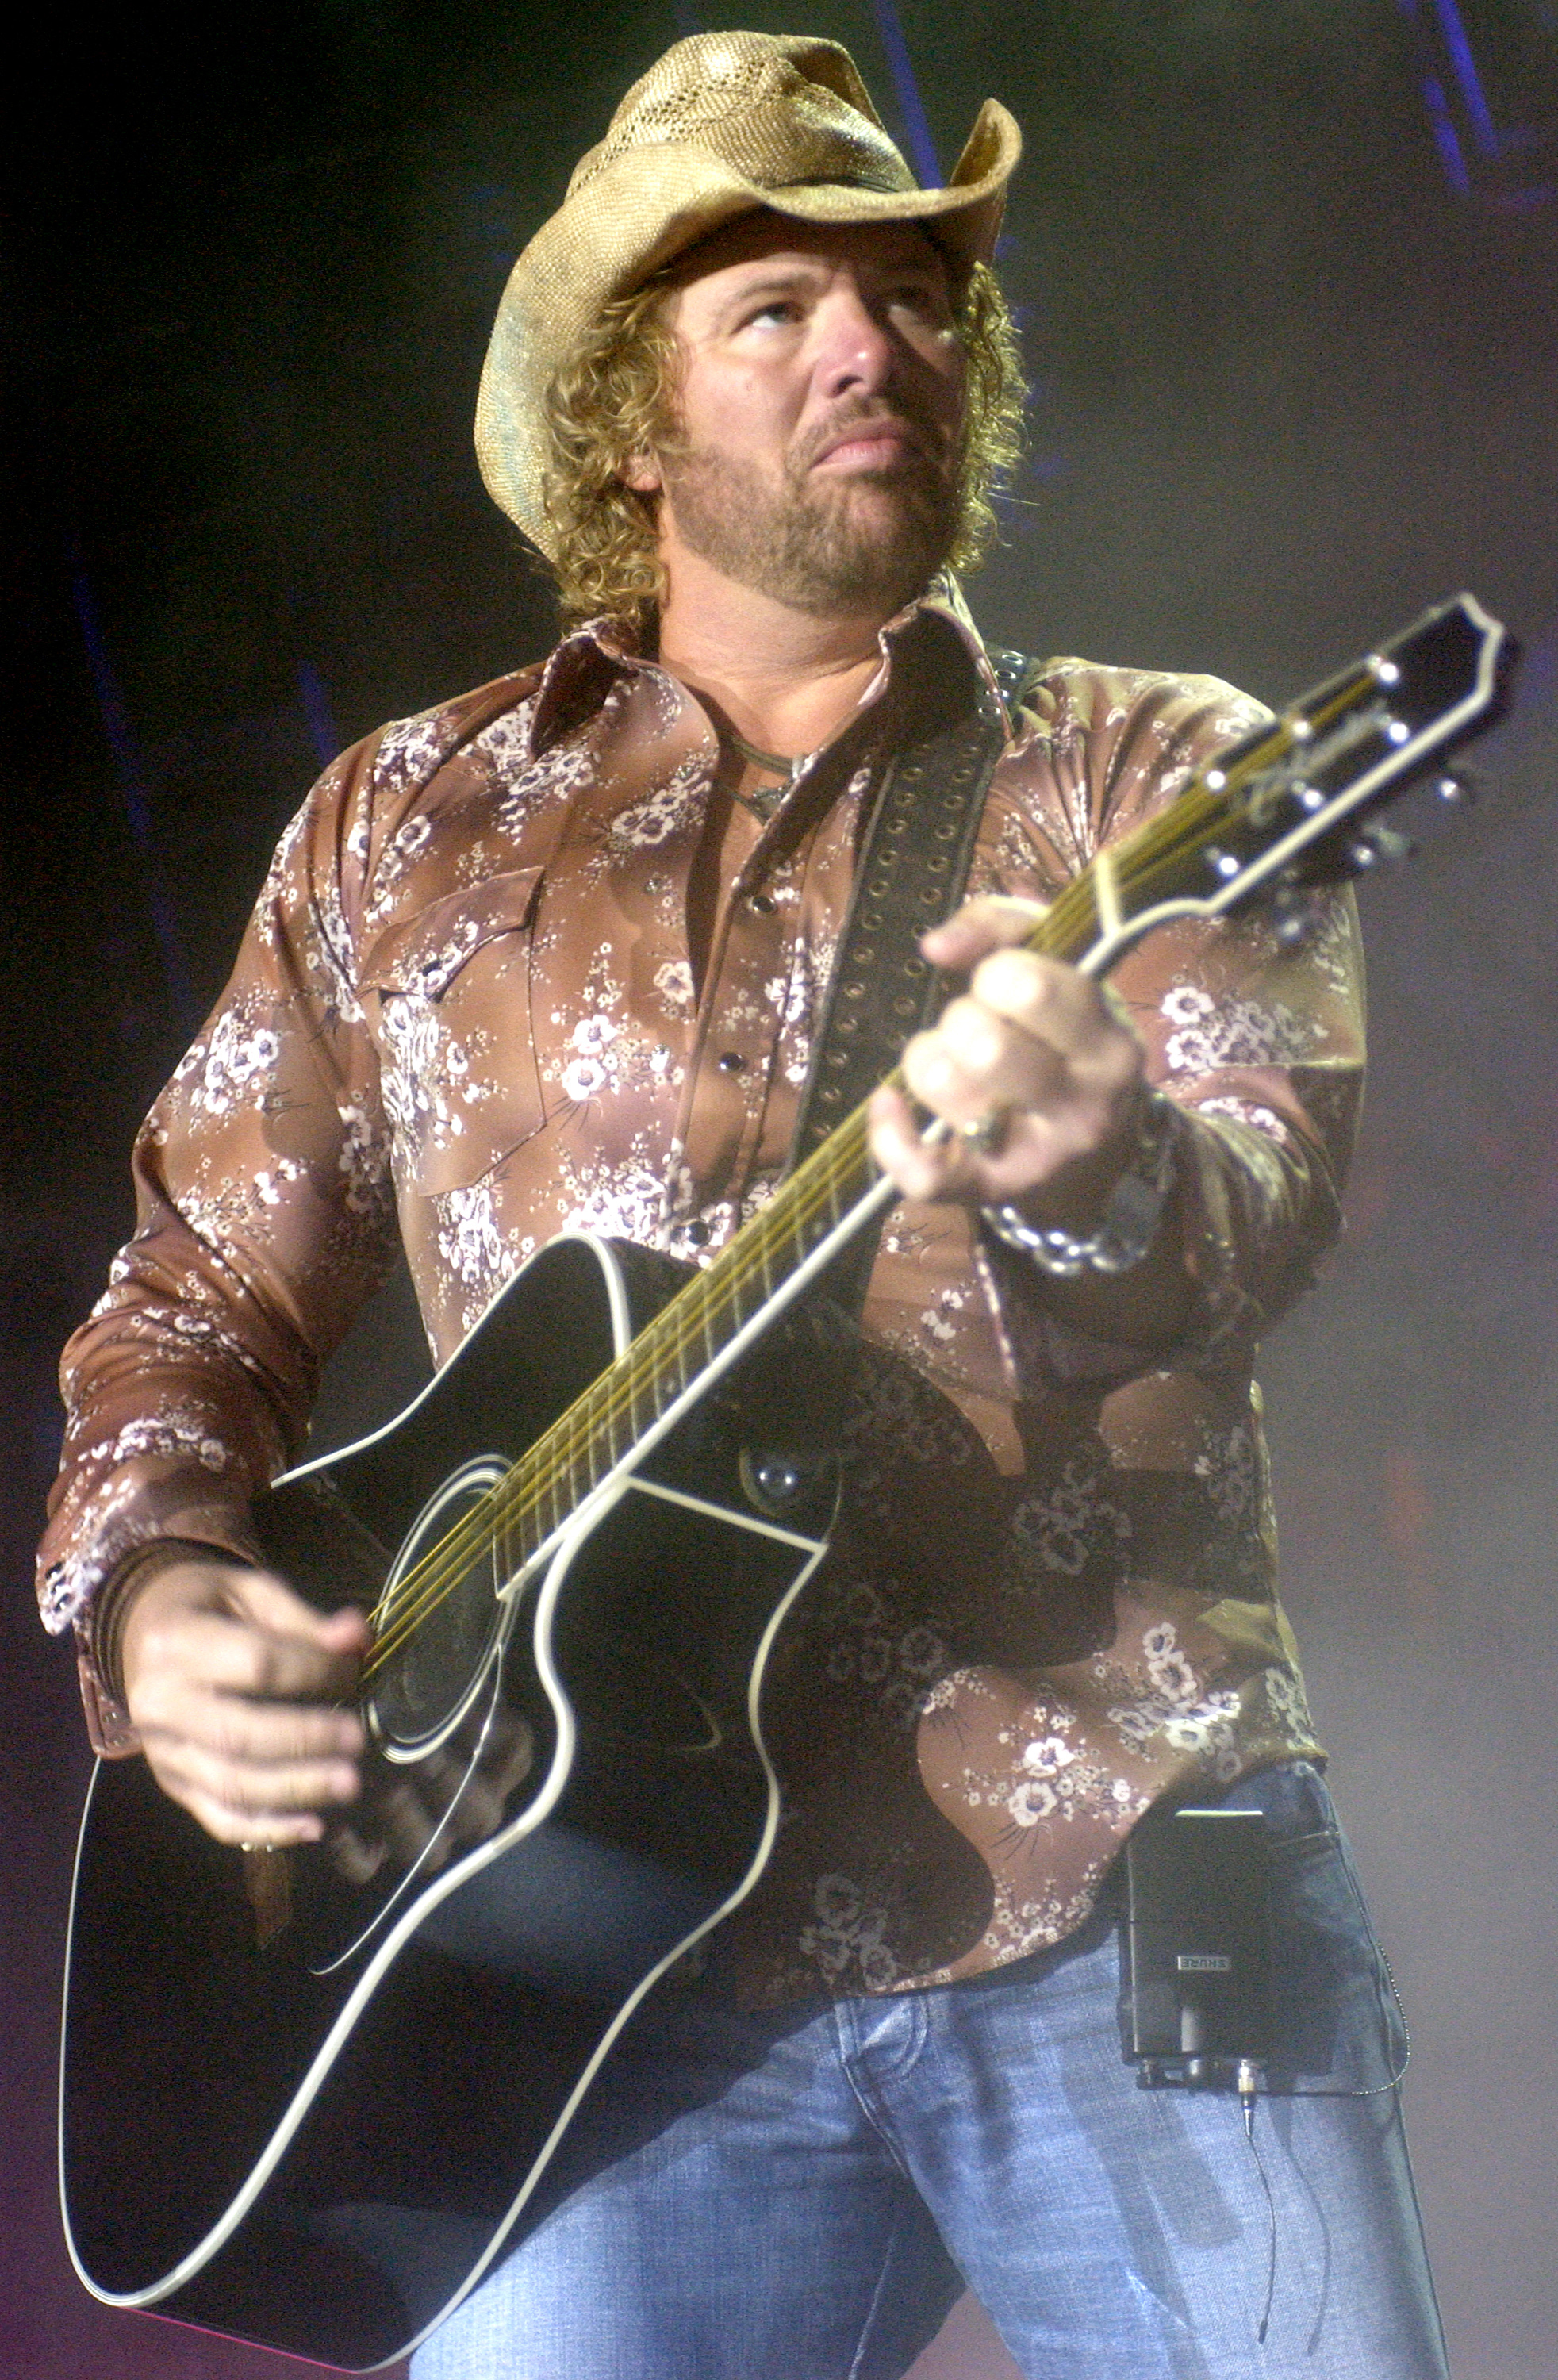 Toby Keith performs during his 2005 "Big Throwdown Tour II" in Mountain View | Source: Getty Images